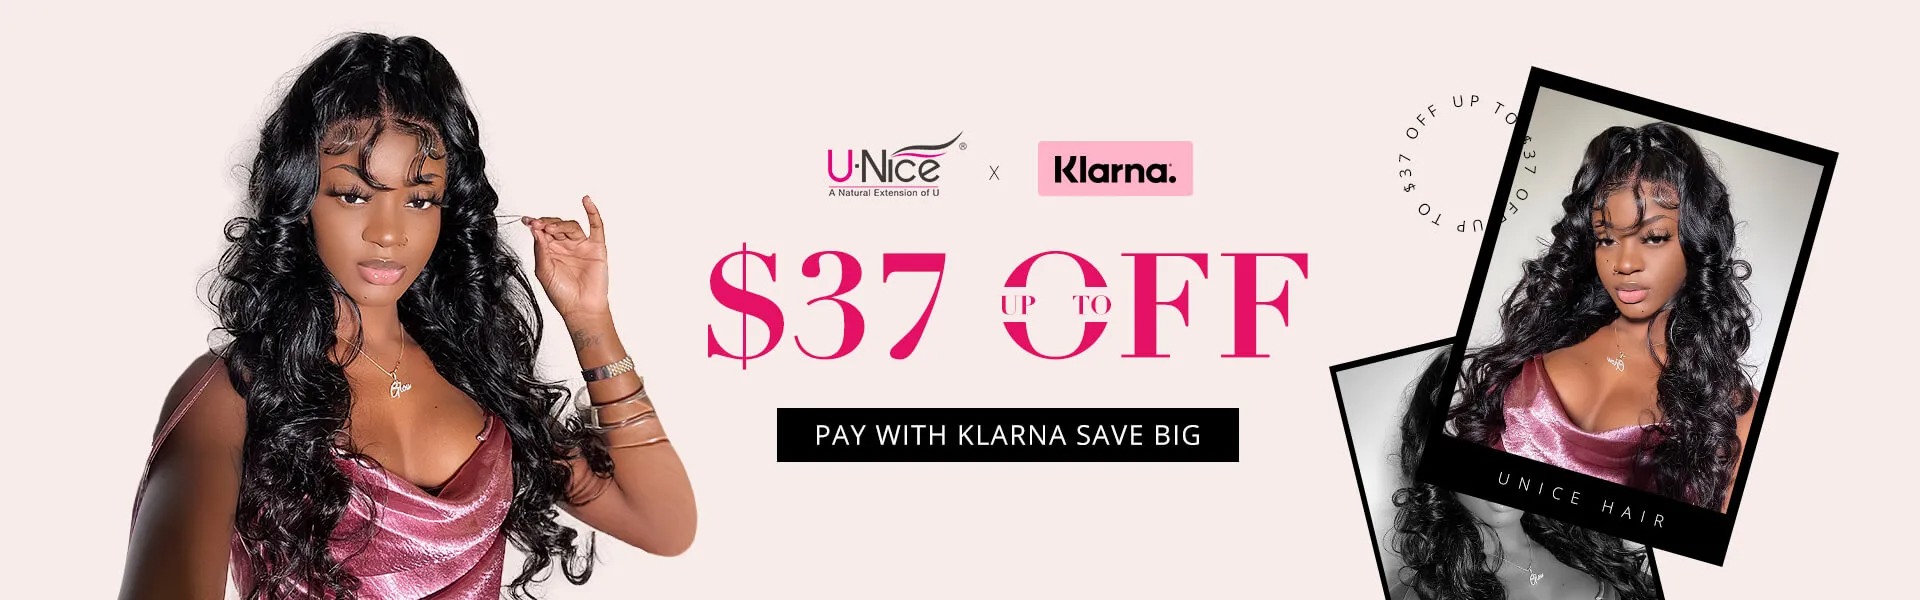 UNice Hair & Klarna Provide Customers A Smoother Shopping Experience